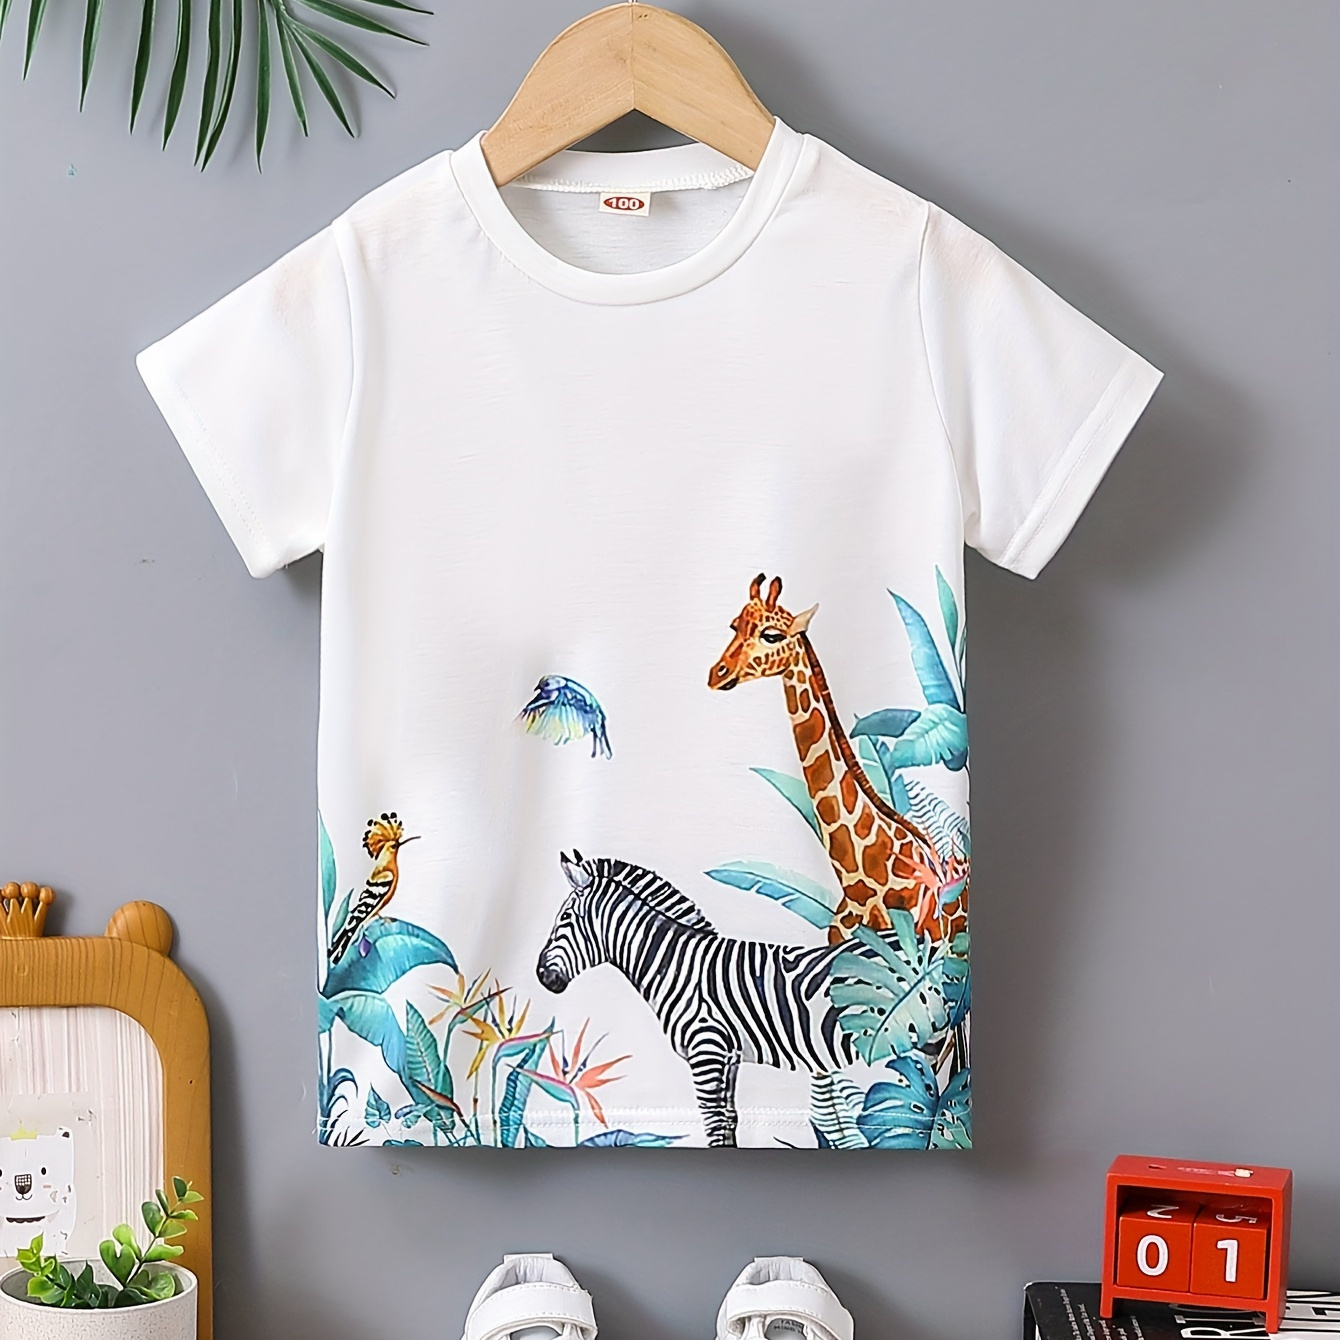 

Zebra And Giraffe Print Boy's Short Sleeve T-shirt Breathable Loose Fitting Round Neck Creative Pattern Casual Top